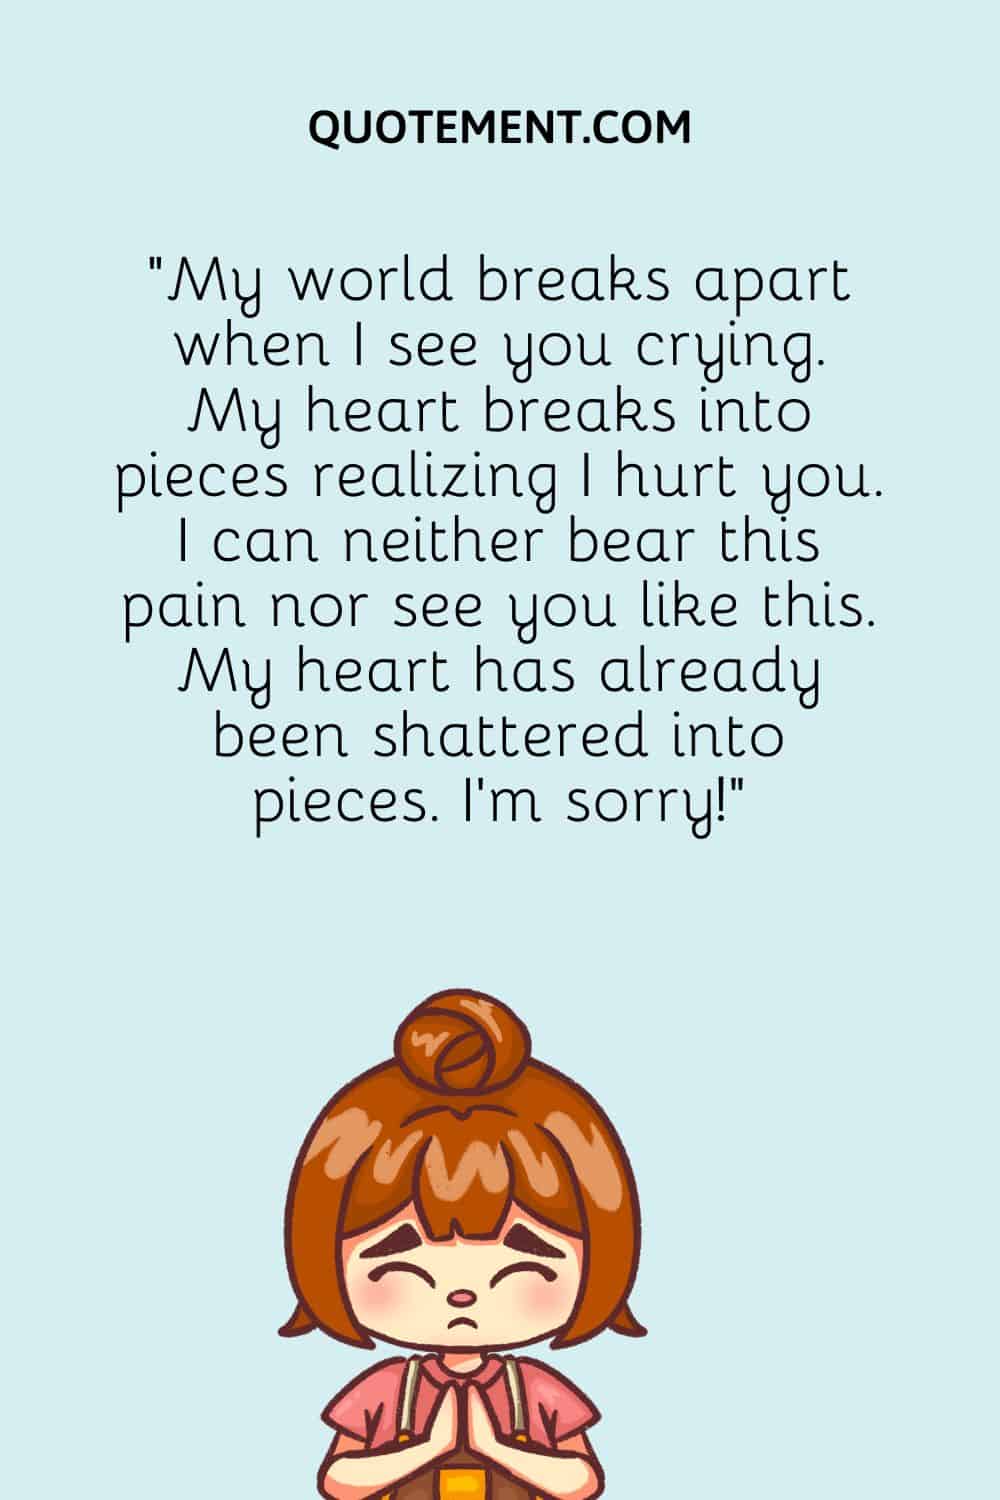 My world breaks apart when I see you crying